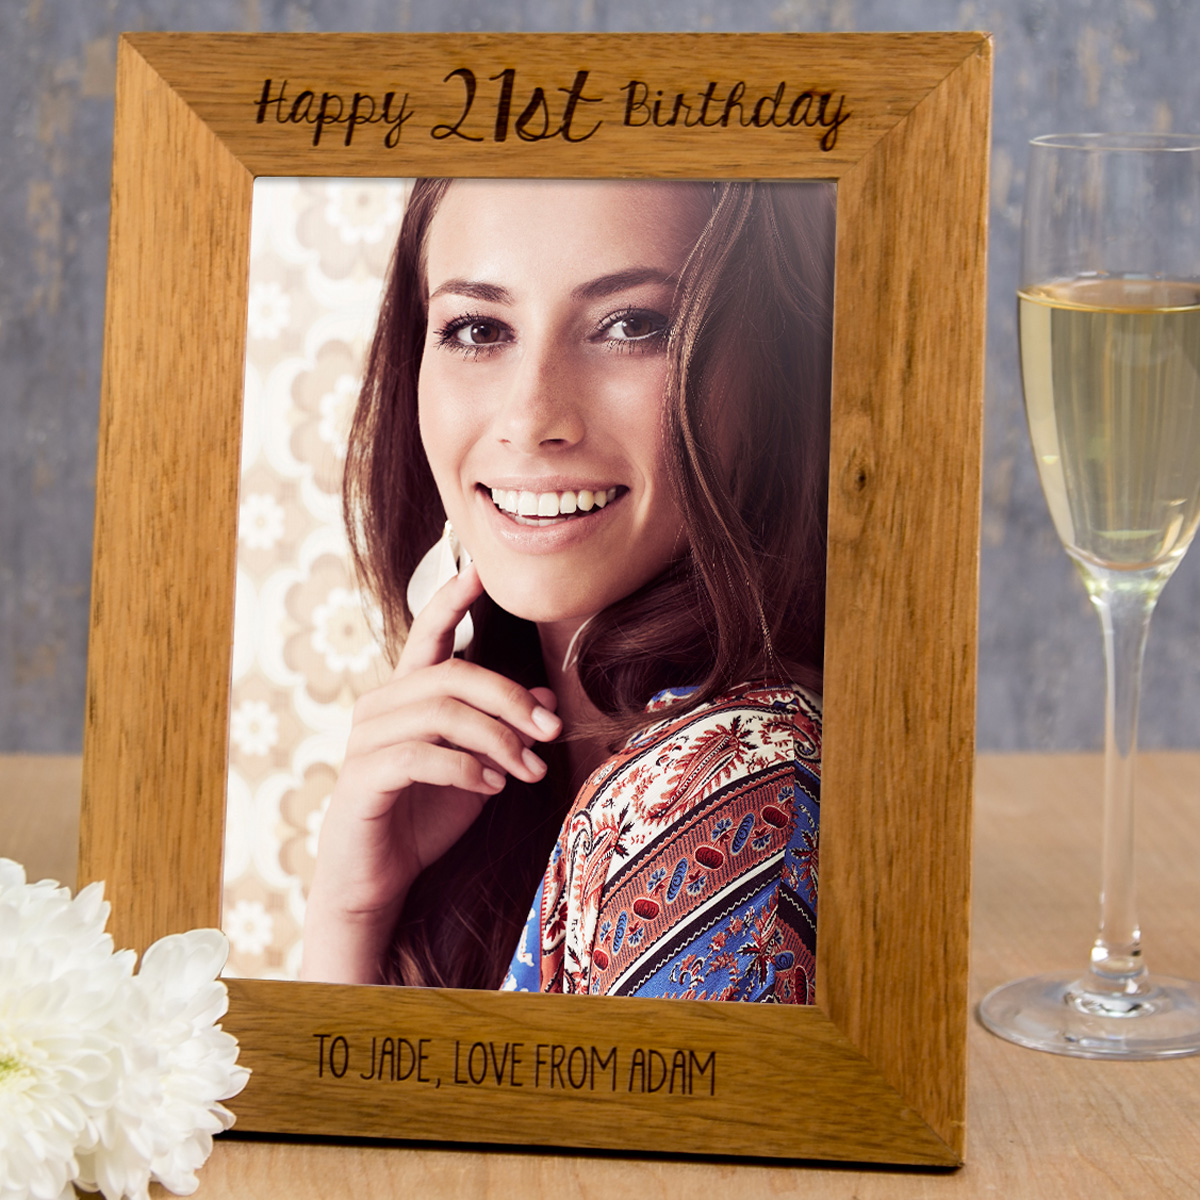 Personalised Engraved Wooden Photo Frame - Happy 21st Birthday